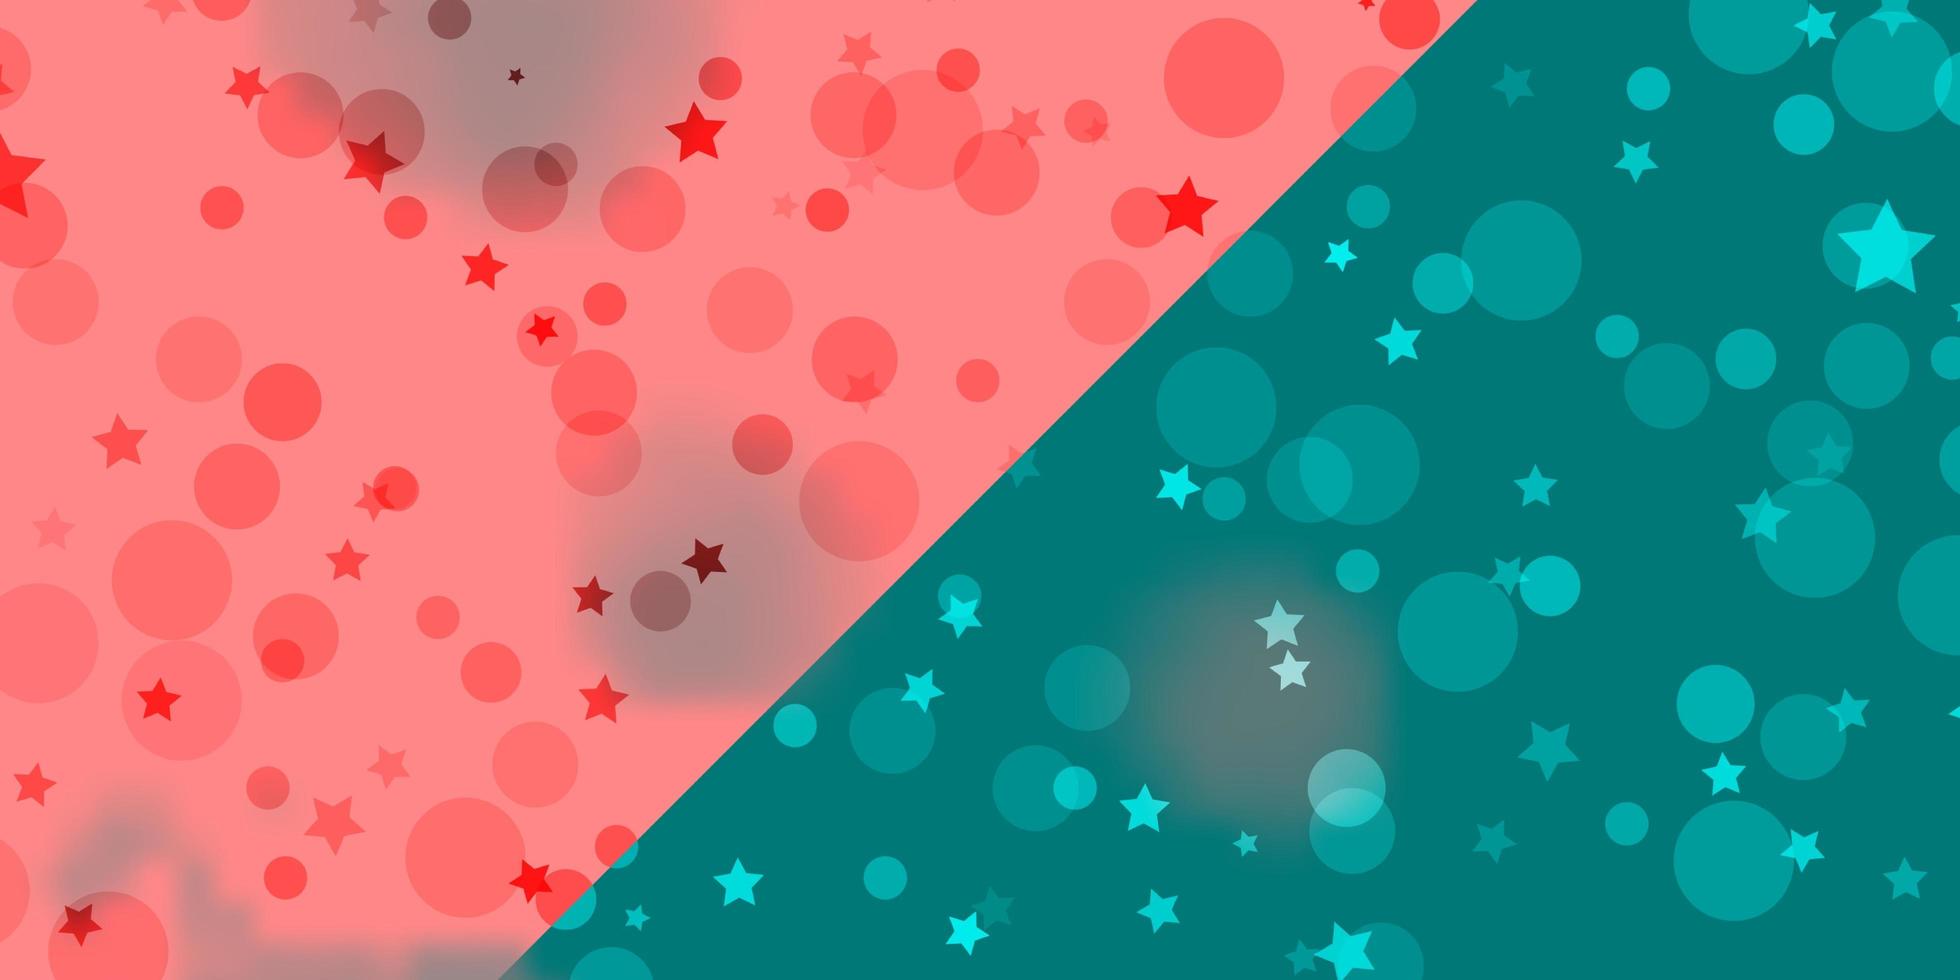 Vector pattern with circles, stars. Illustration with set of colorful abstract spheres, stars. Design for wallpaper, fabric makers.